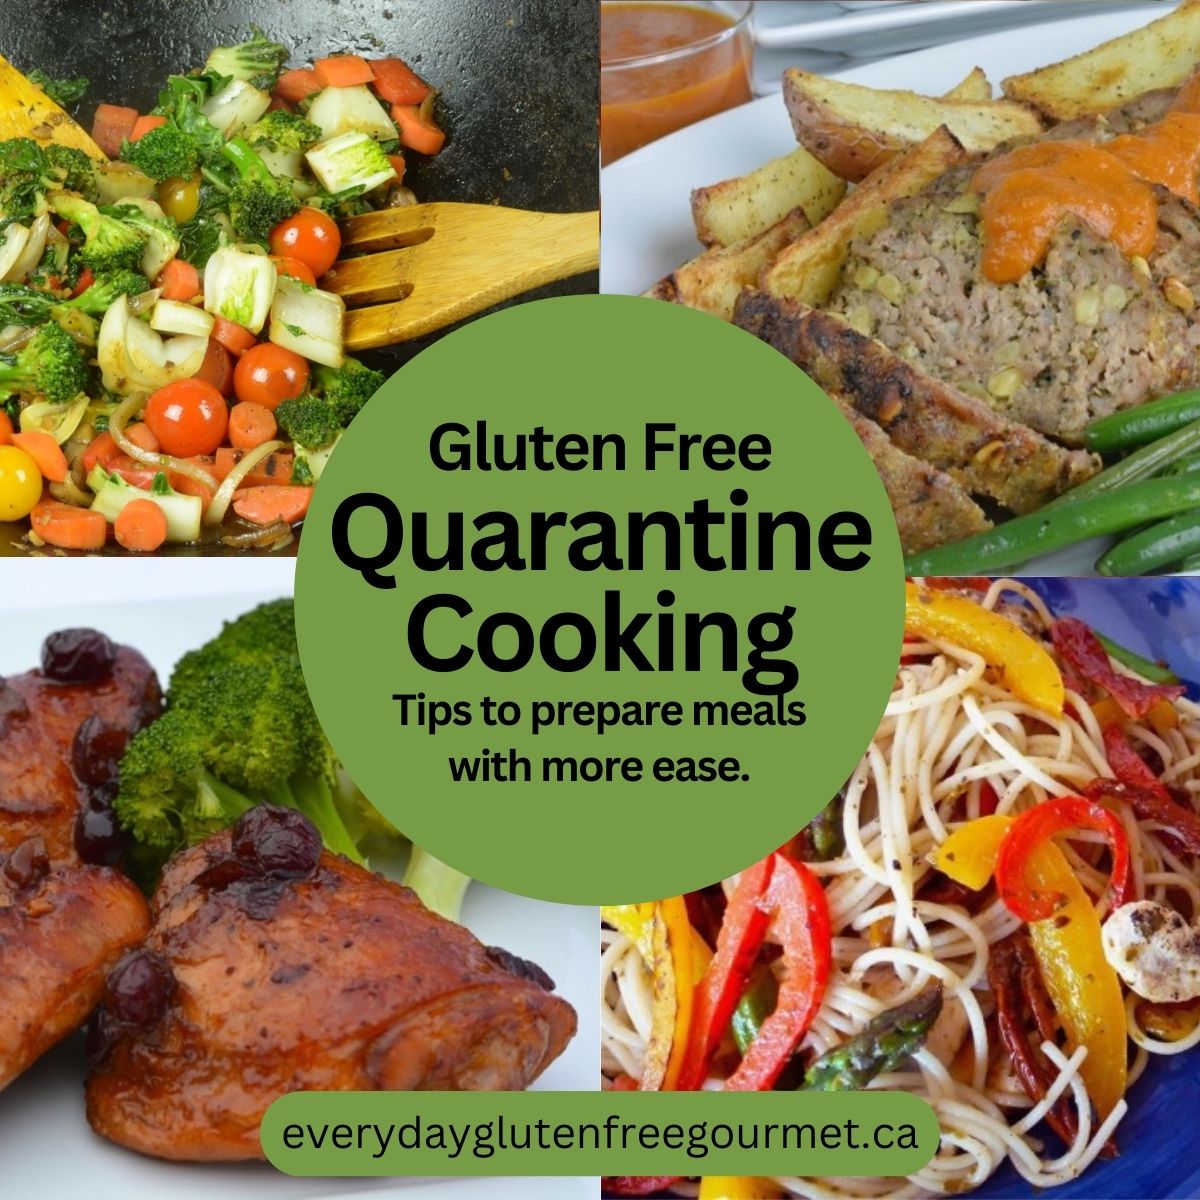 4 Easy recipes for Gluten Free Quarantine Cooking; a vegetable stir fry, meat loaf, a saucy oven-baked chicken and Pasta with Pesto Sauce.